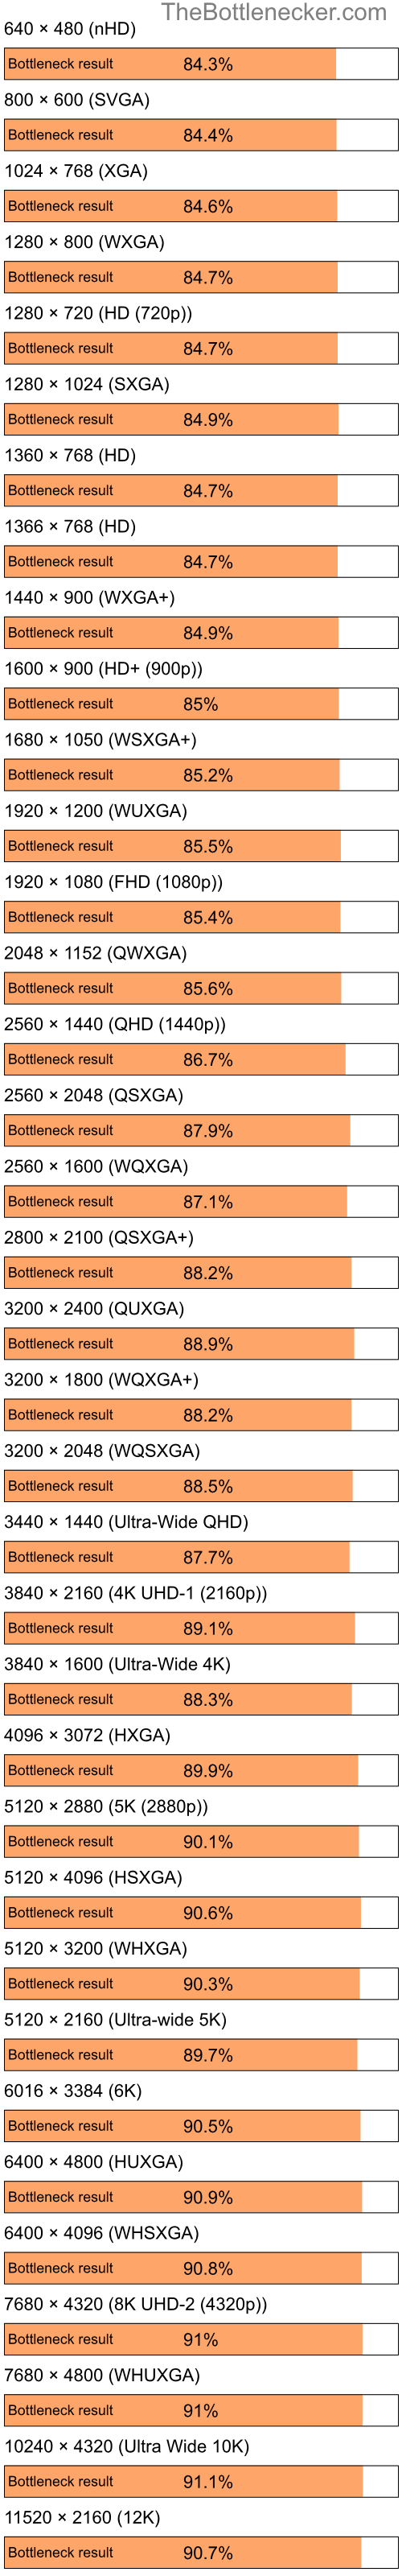 Bottleneck results by resolution for Intel Celeron M 410 and NVIDIA GeForce 6150 in Graphic Card Intense Tasks